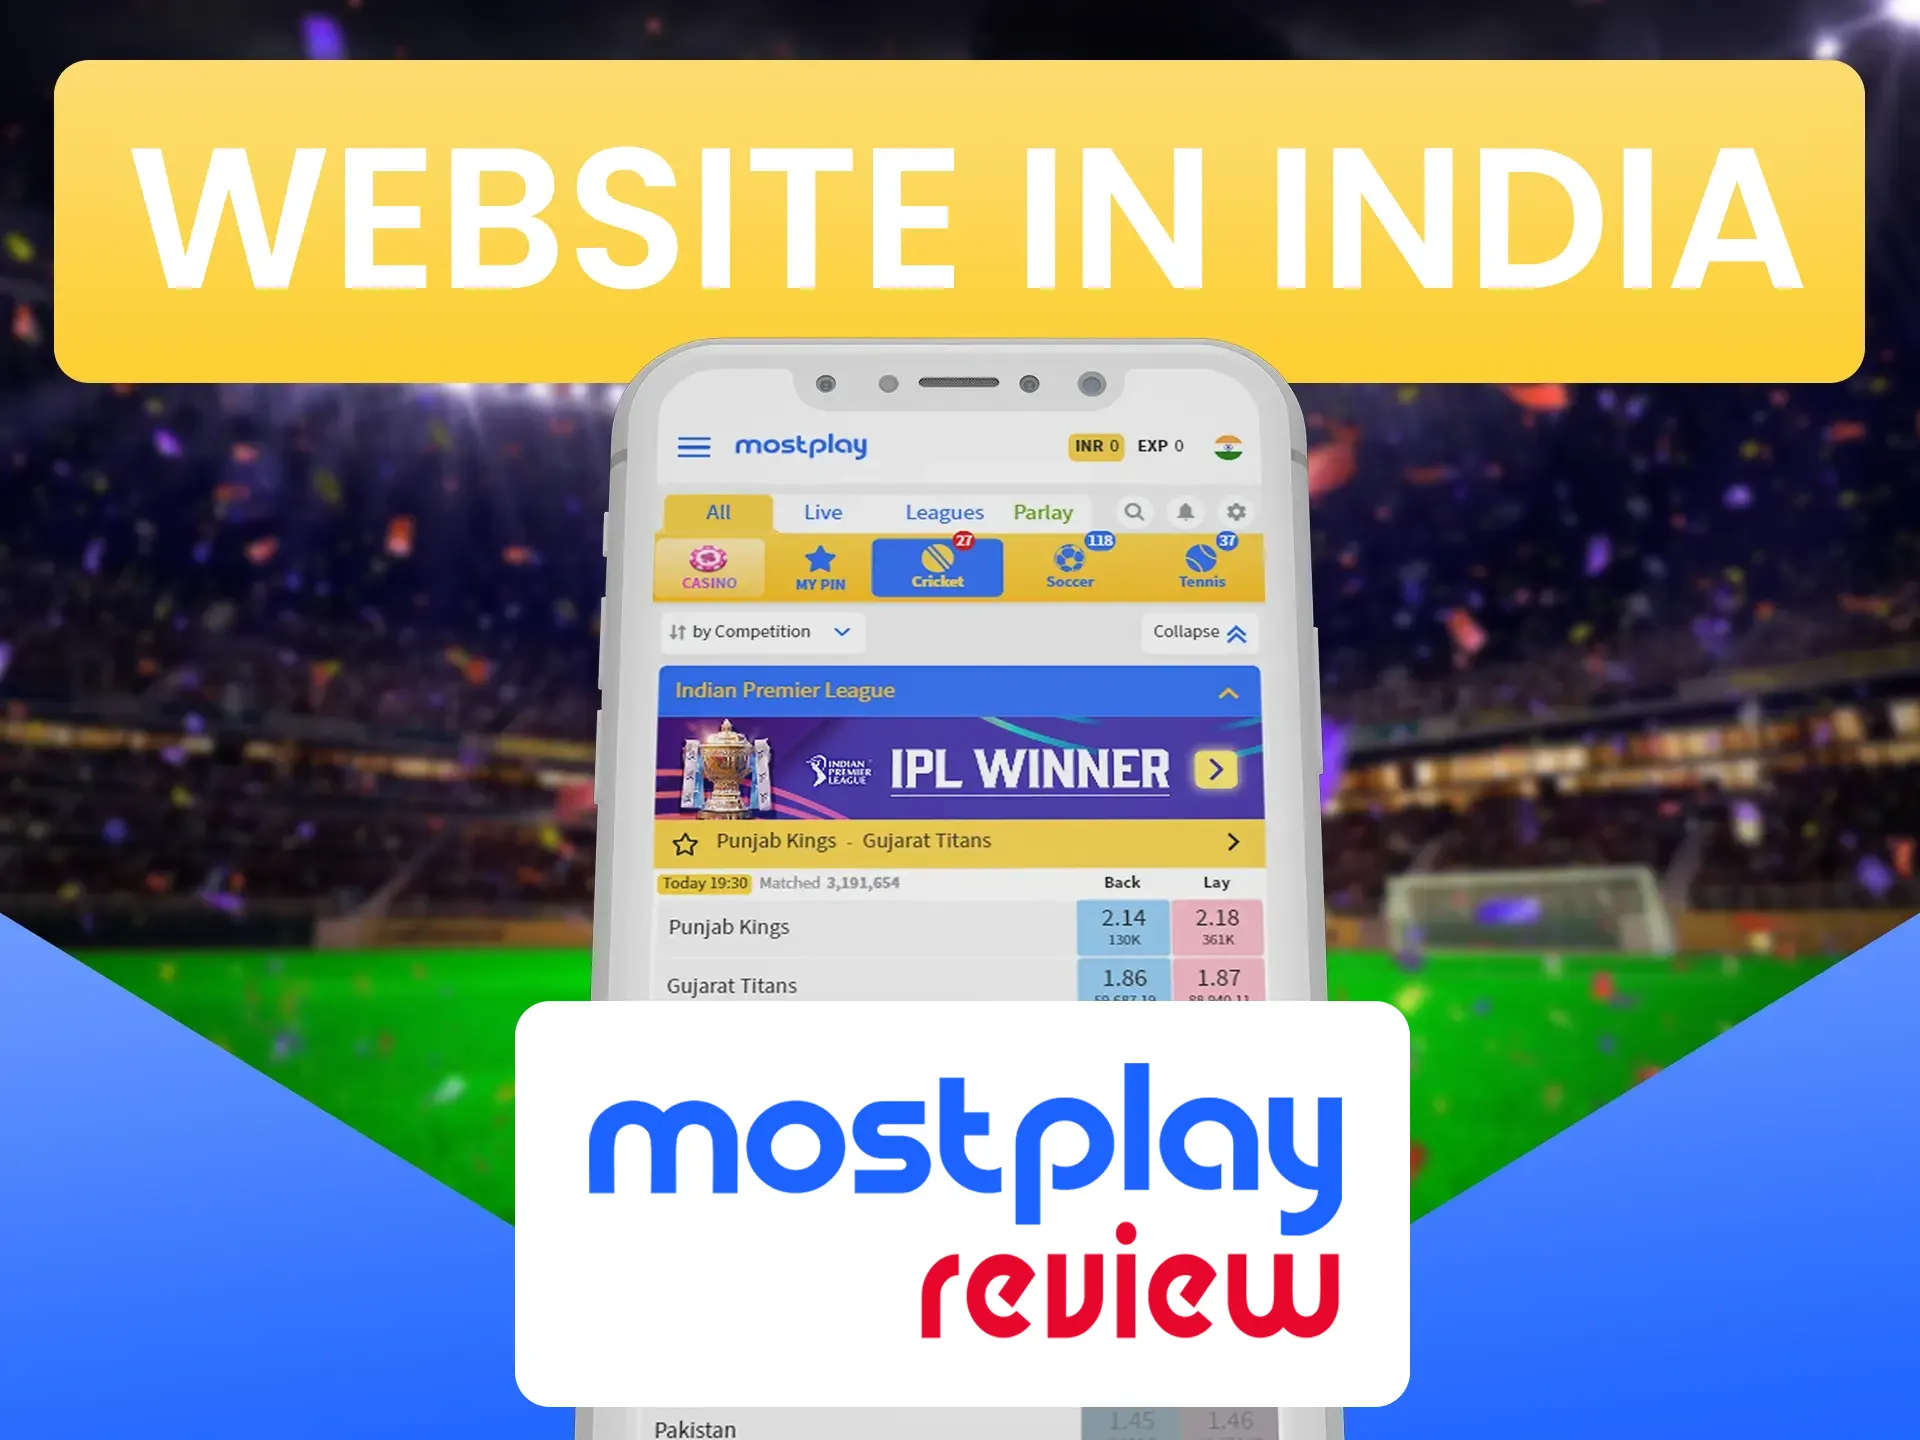 Enter on the Mostplay website using any device.